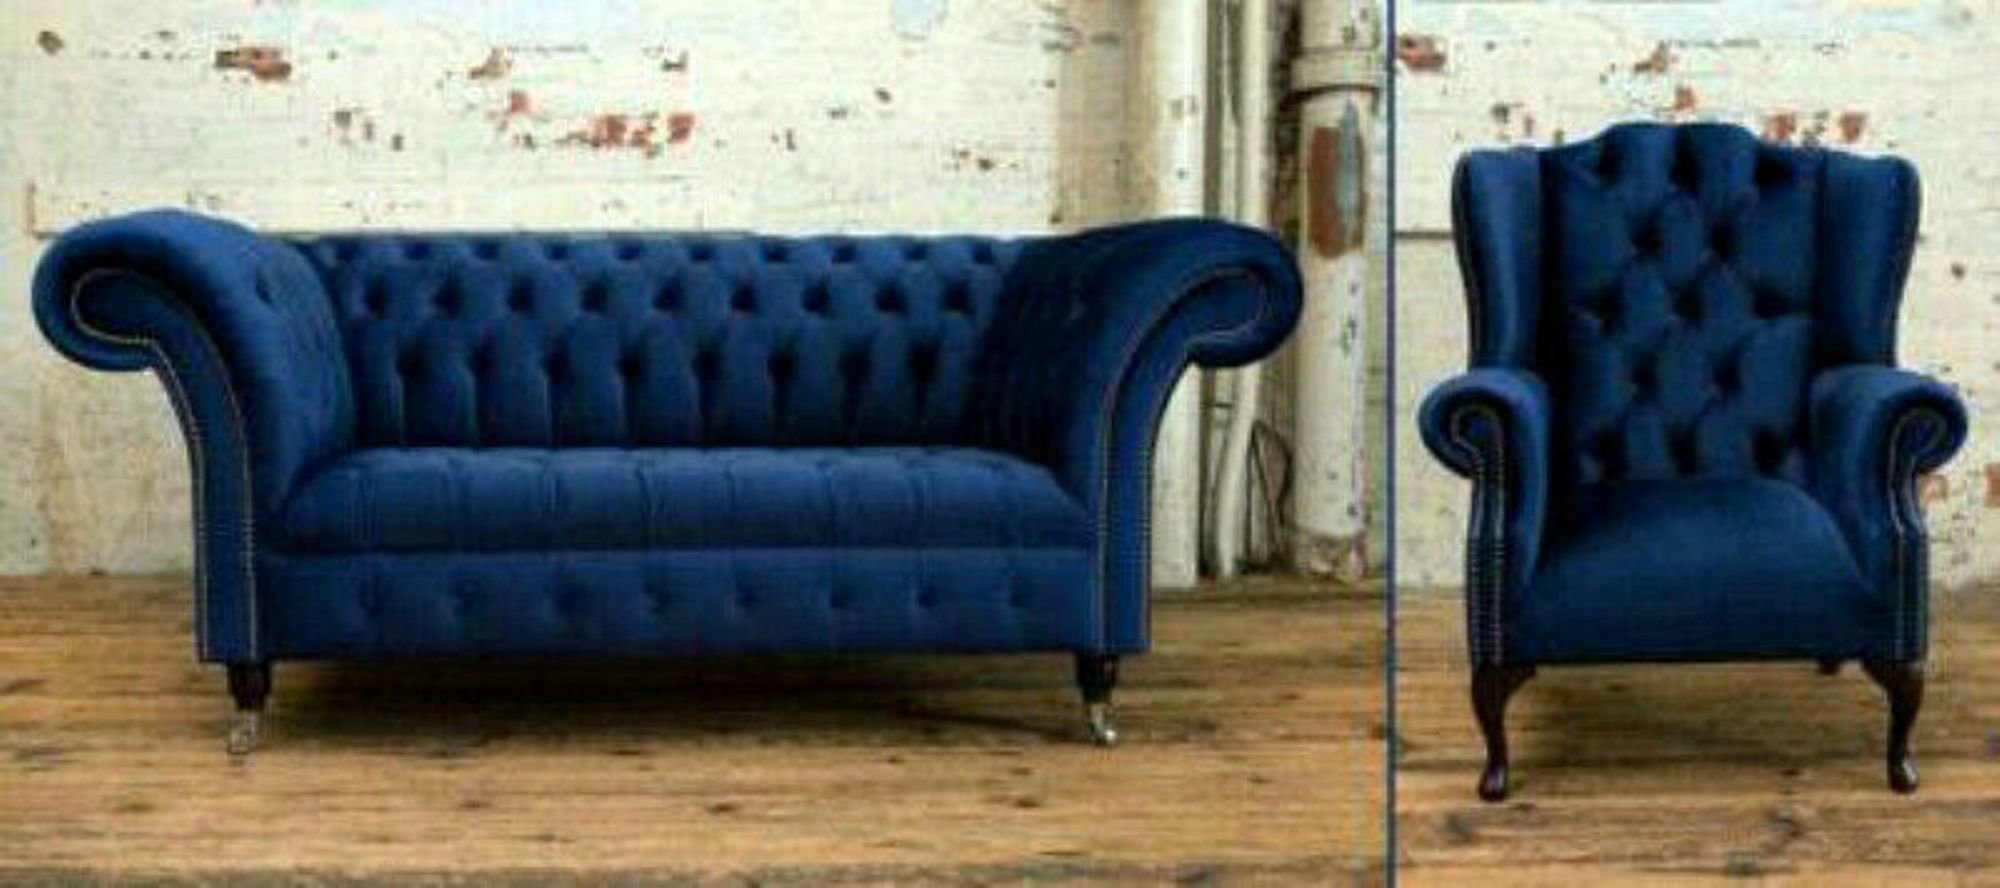 Sitzer + Chesterfield Sofa in Ohrensessel JVmoebel Chesterfield-Sofa Europe Designer Made Relax, Couch 2